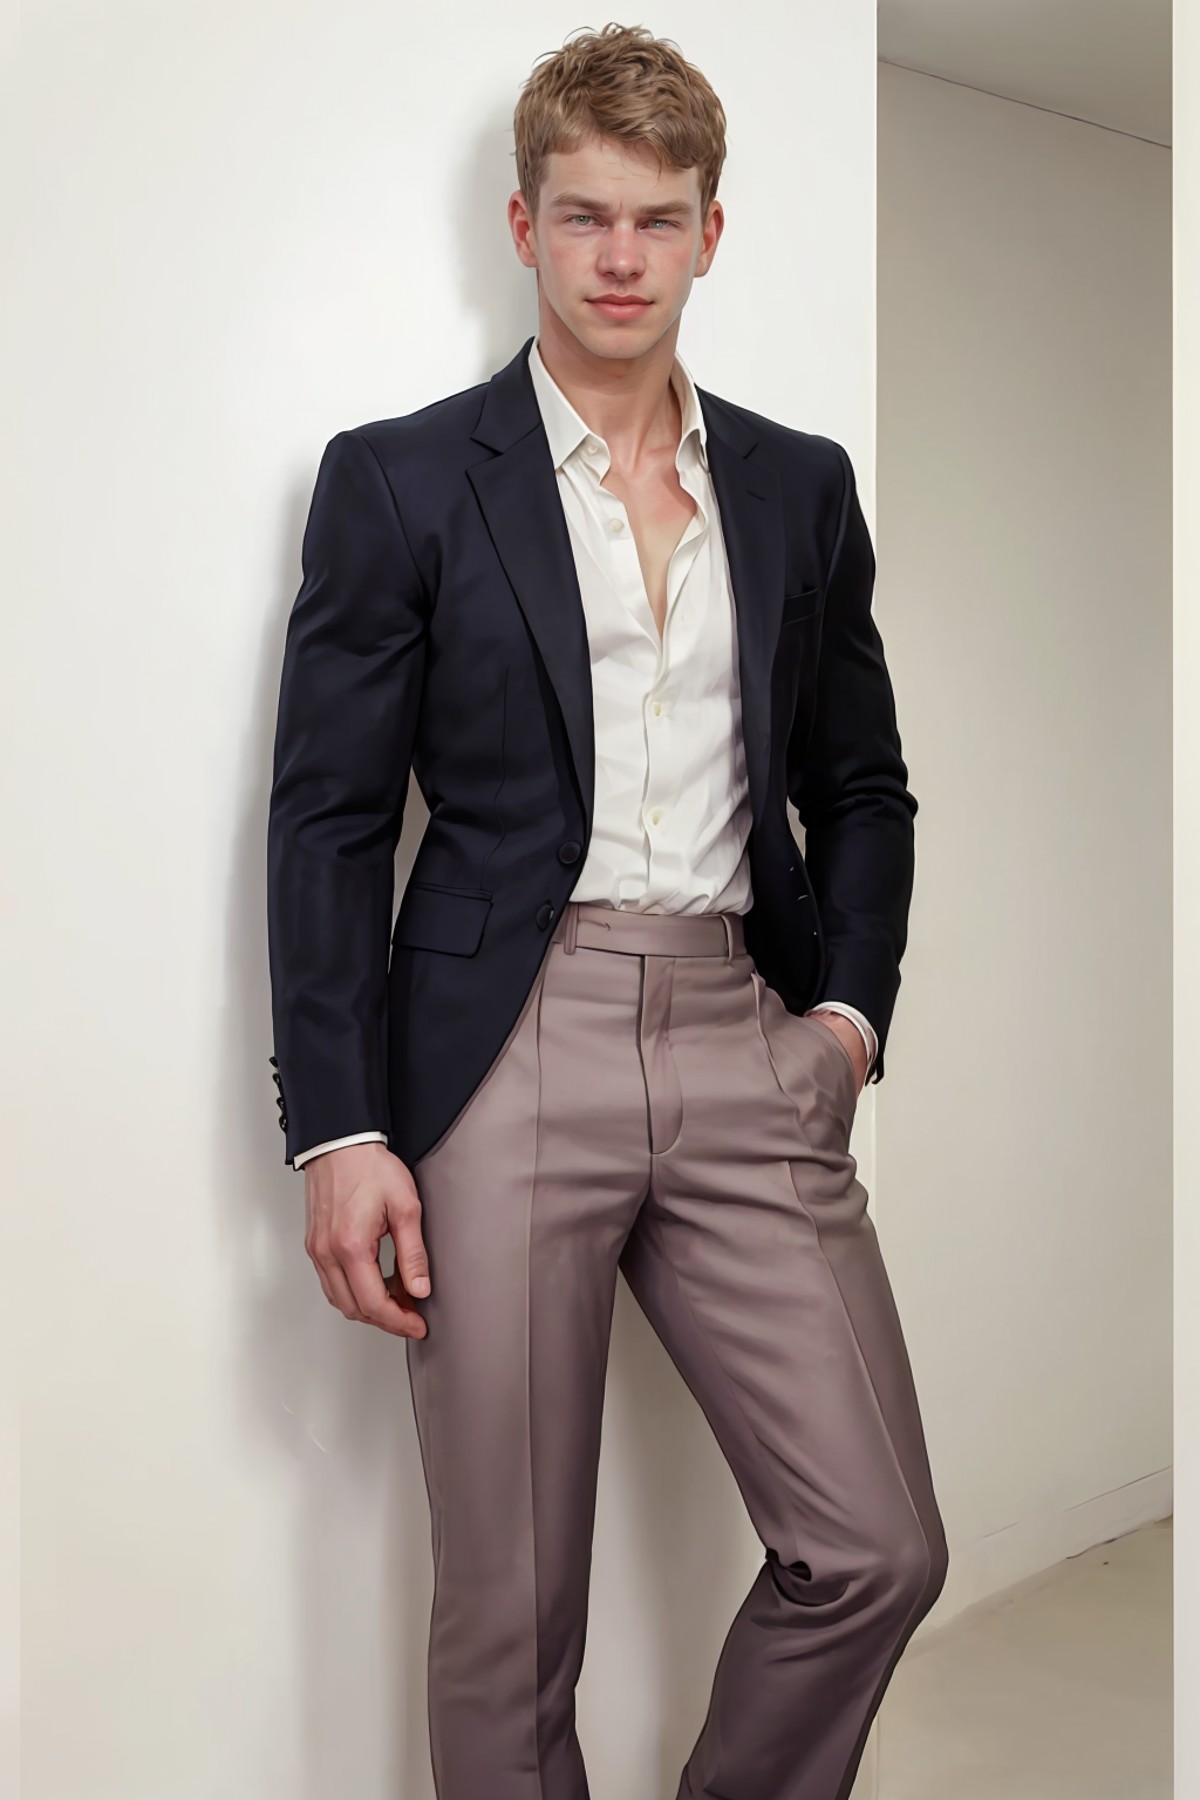 <lora:sebastian_bonnet-06:0.8> seb, relazed poised expression, wearing an Alexander McQueen pink tailored suit, standing i...